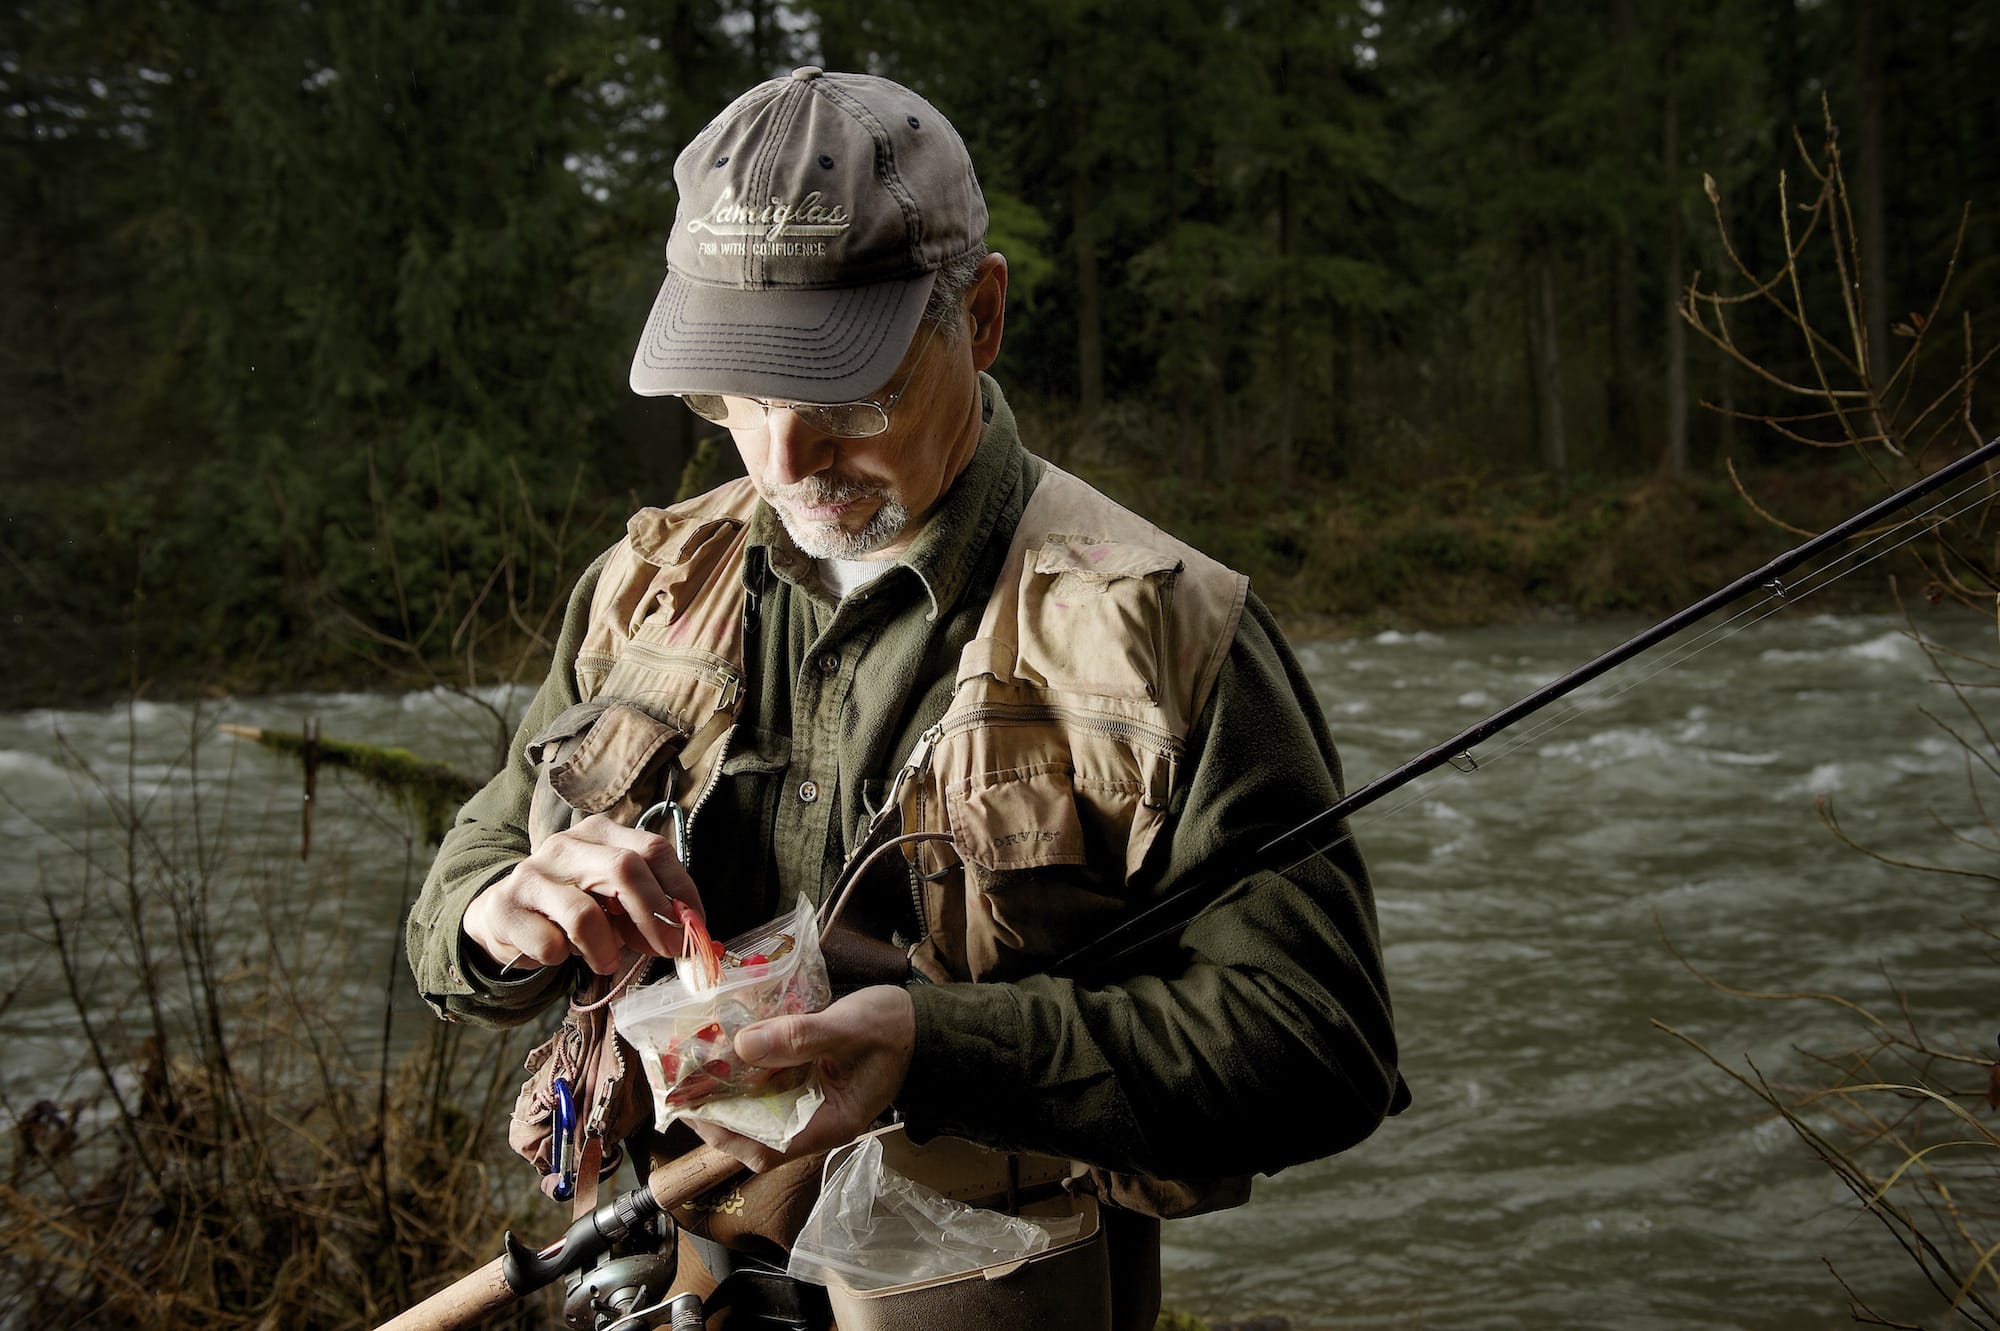 Lyle Cabe sorts through a plastic bag of spinners and spoons looking for the lure he wants while fishing for winter steelhead in the East Fork of the Lewis River.